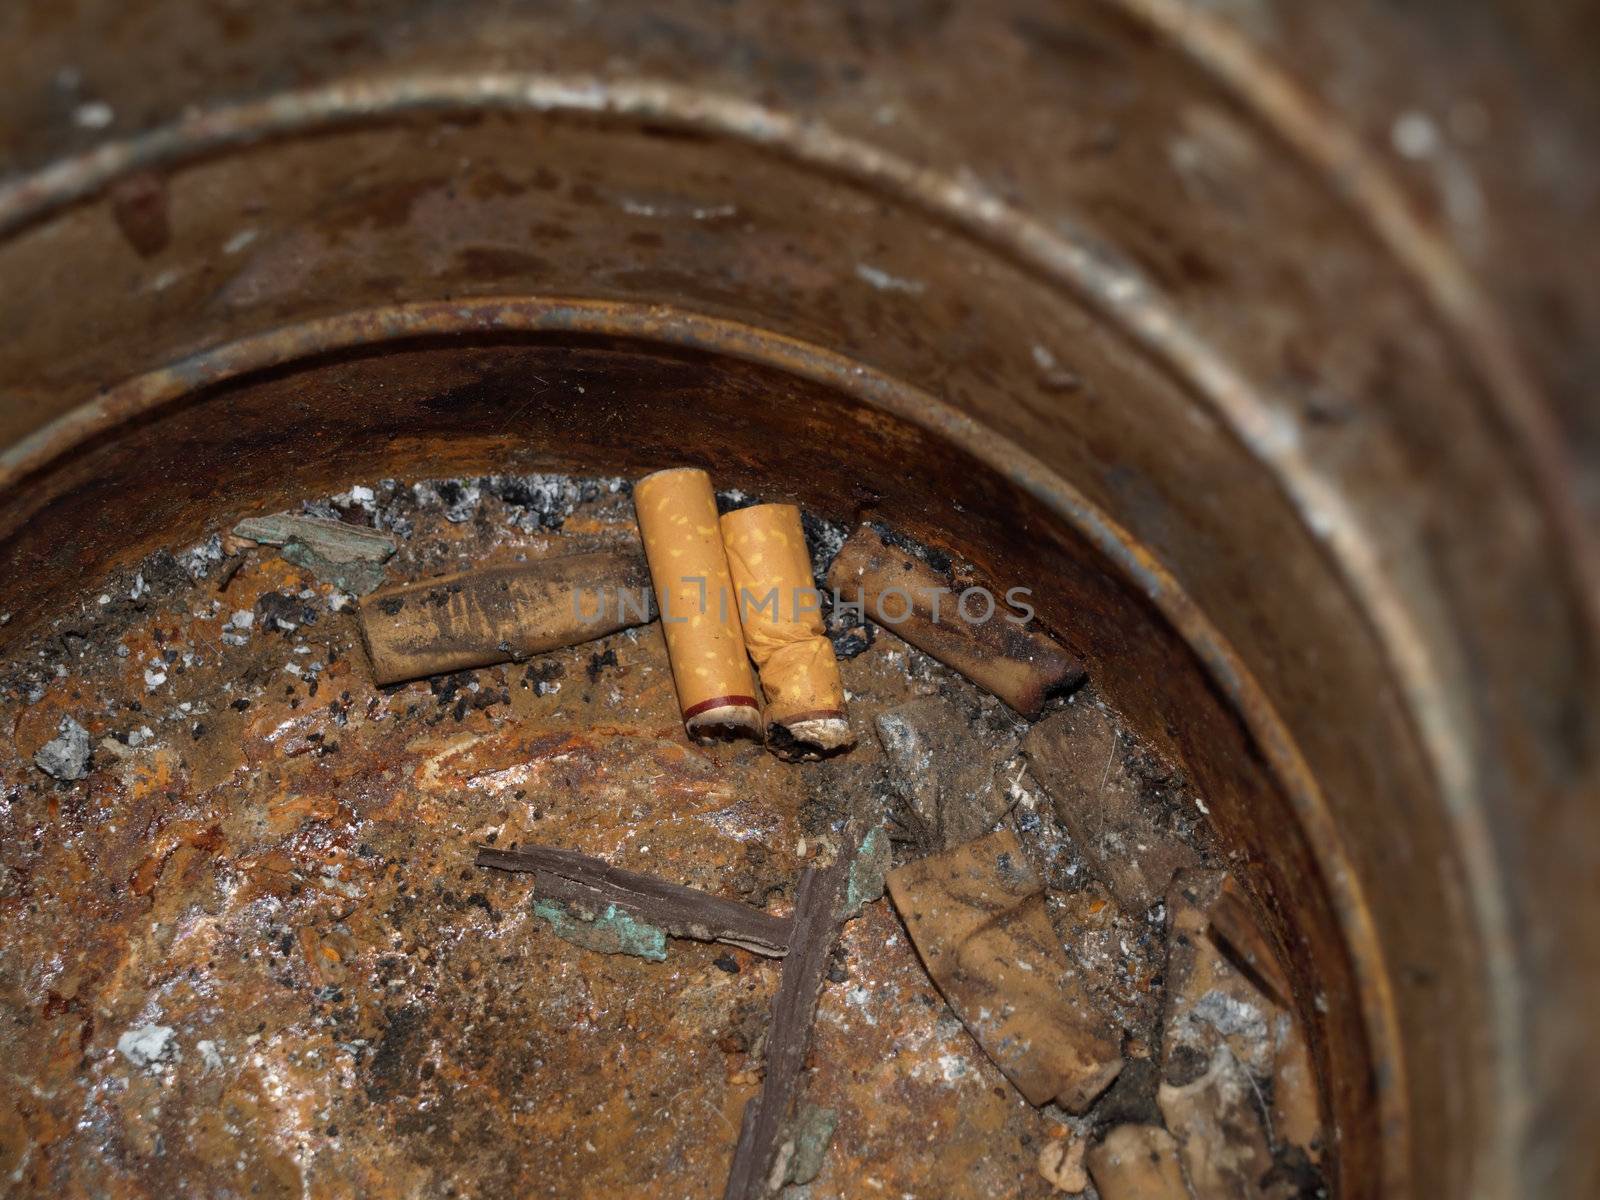 A rusty old coffee can with discarded cigarette butts.